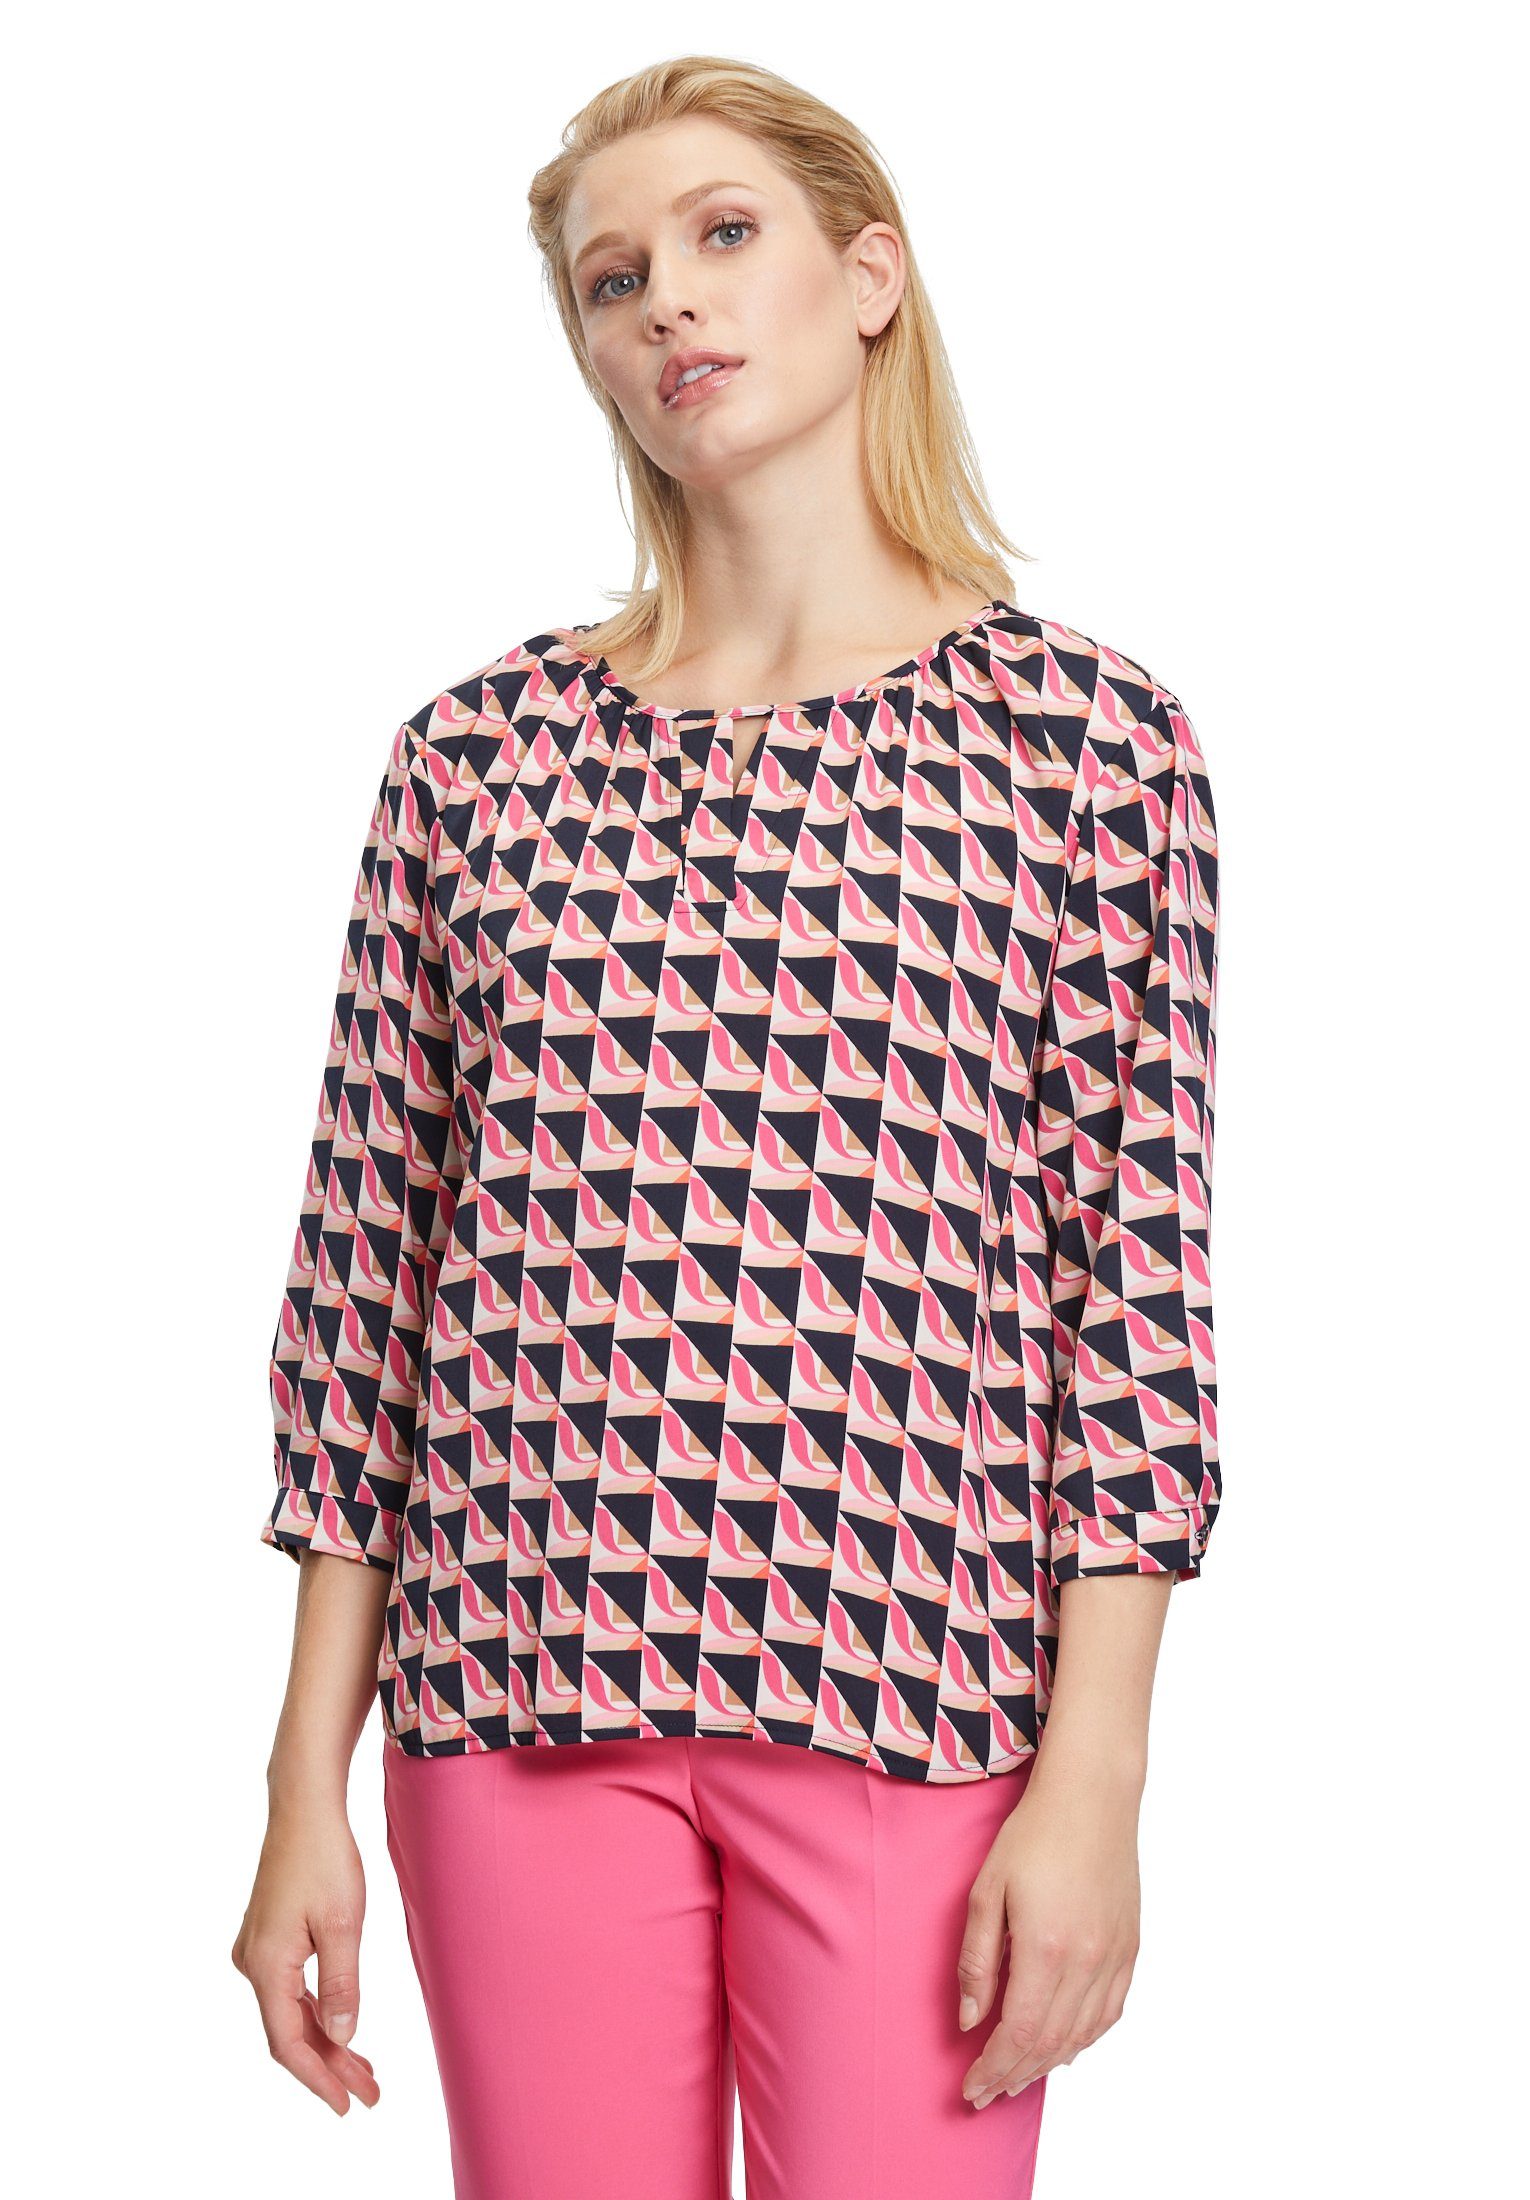 Muster Bluse Rosa Betty Muster Klassische mit Barclay